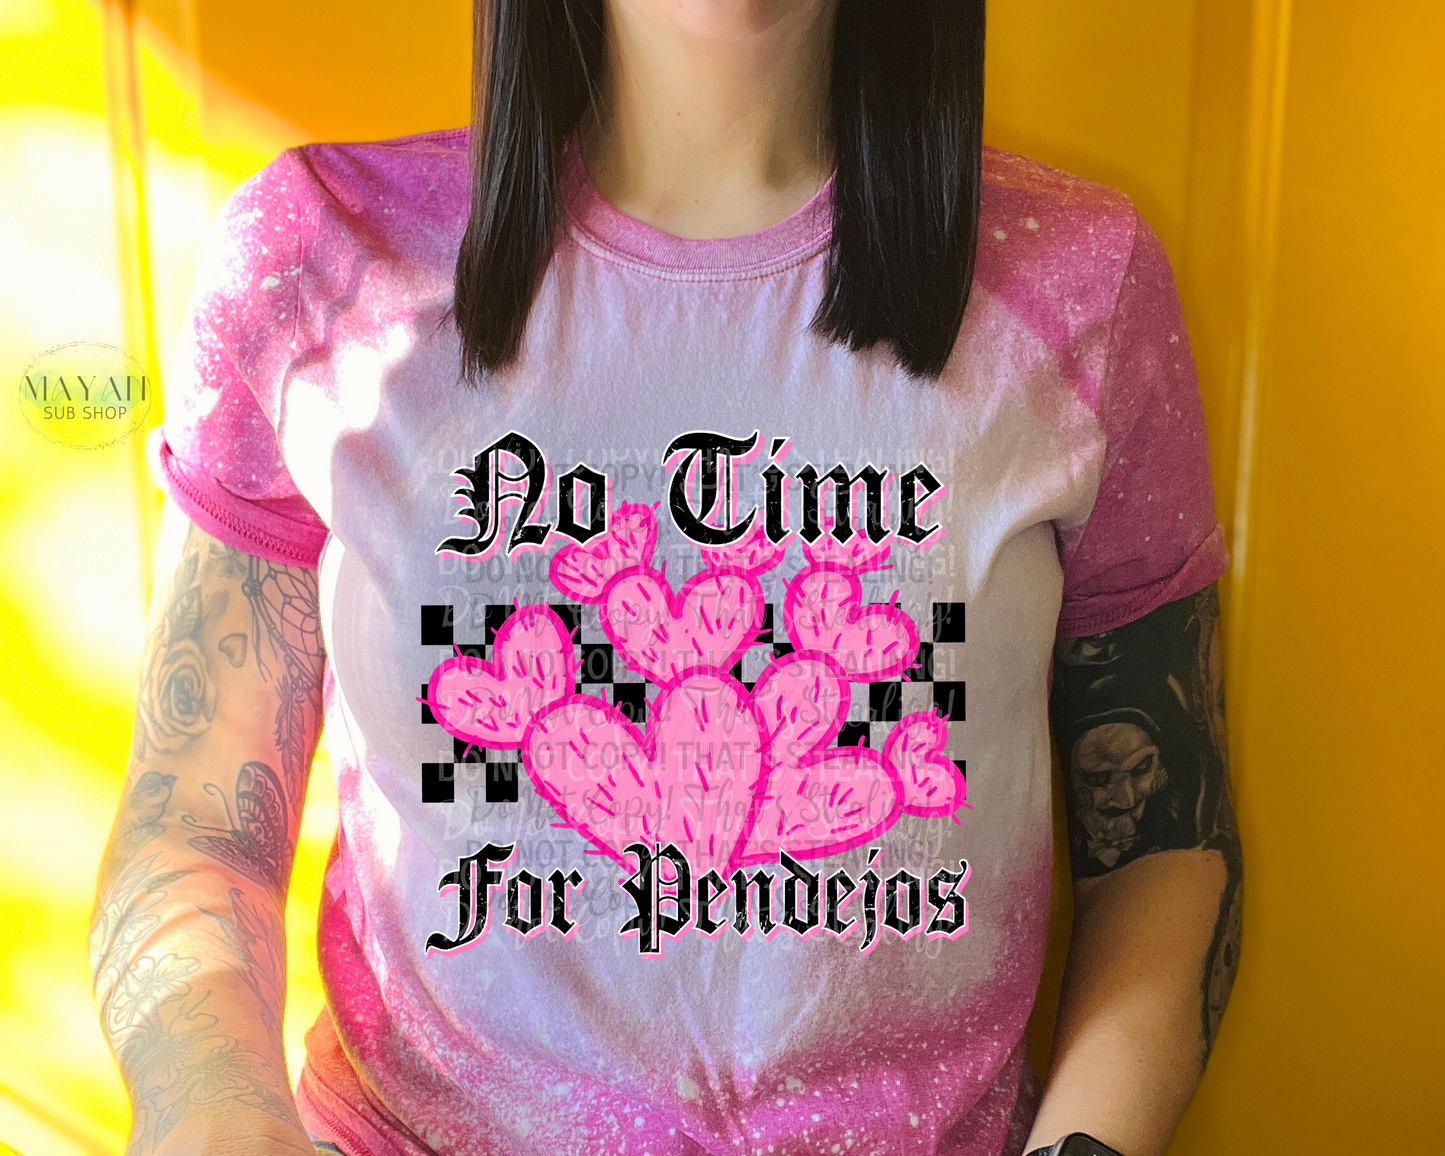 No Time For Pendejos Bleached Tee - Mayan Sub Shop